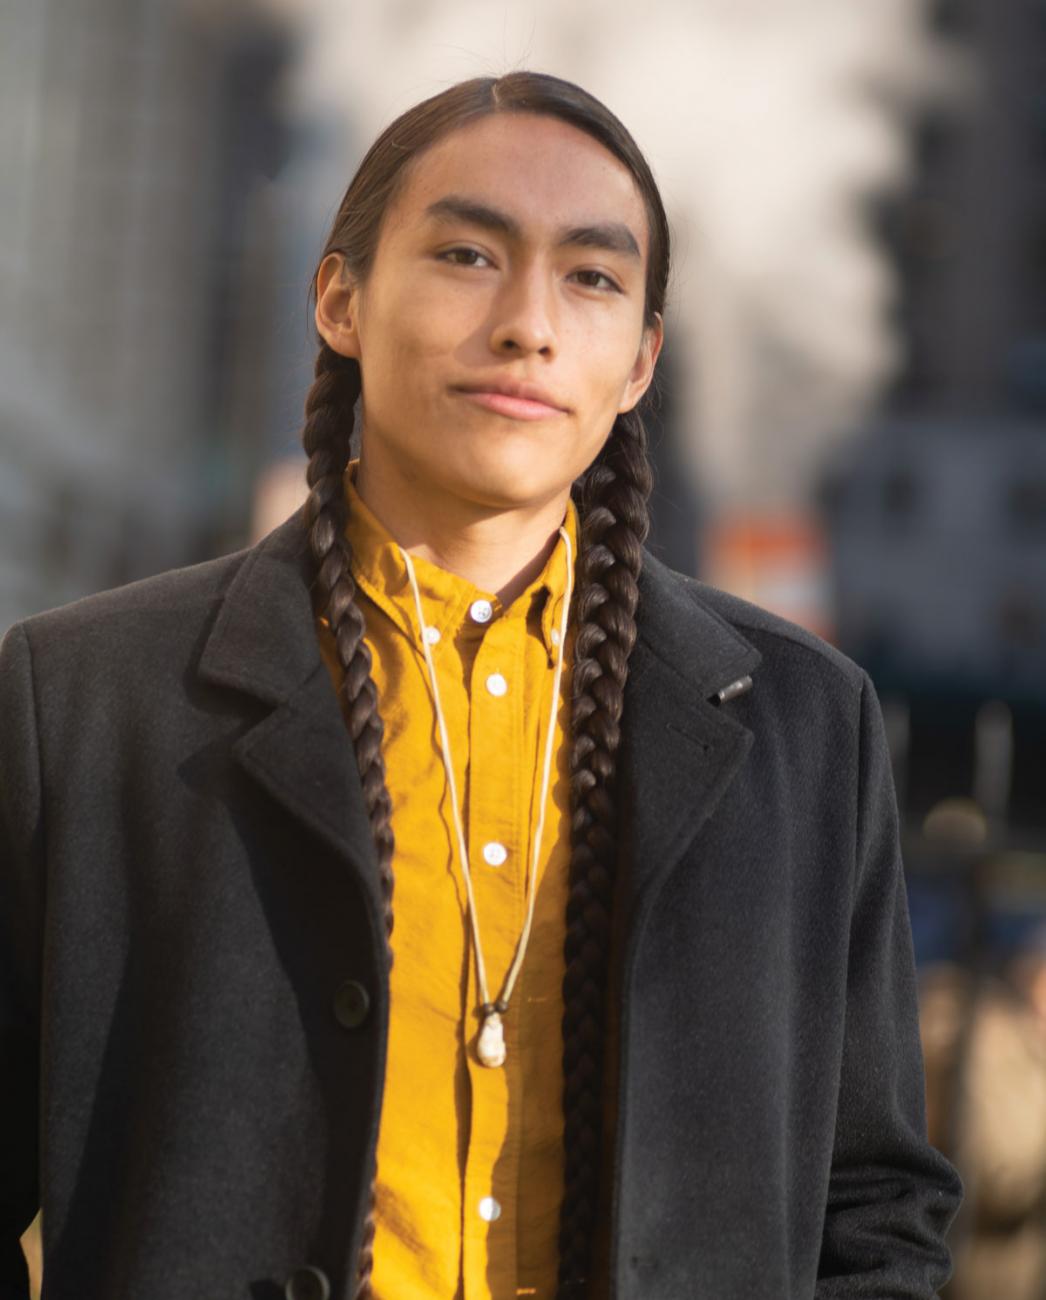 True Native New Yorkers: Connecting to Community and Each Other, Even in a  Crowd